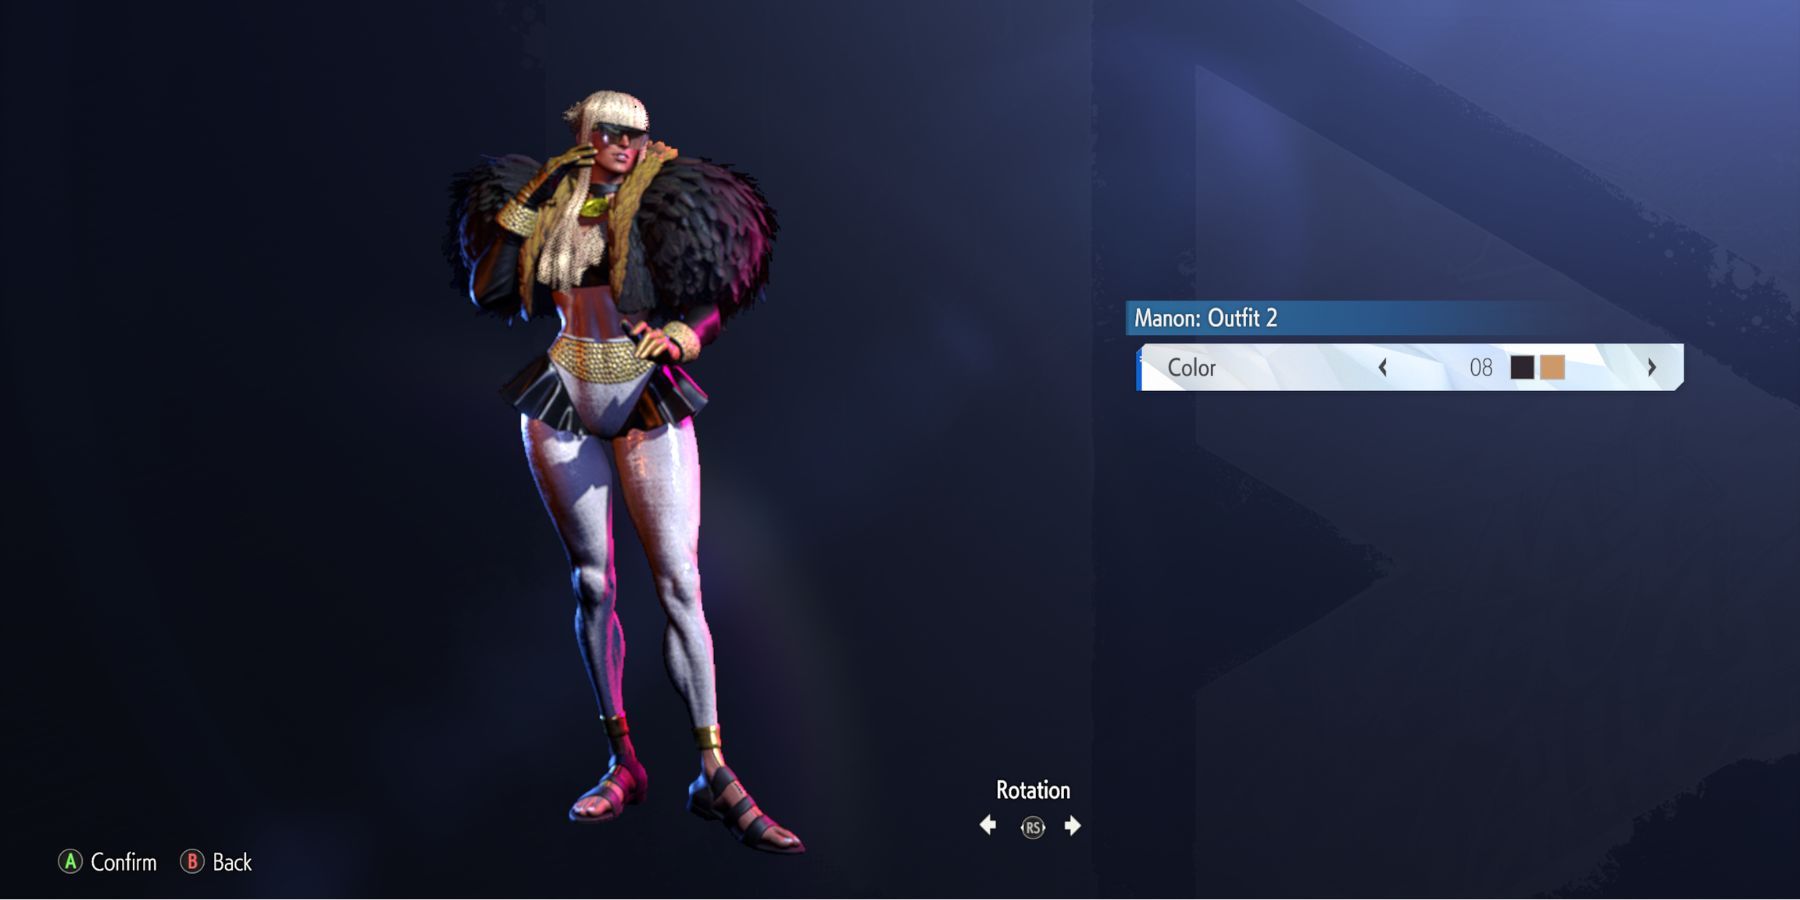 image showing manon's outfit 2 in street fighter 6